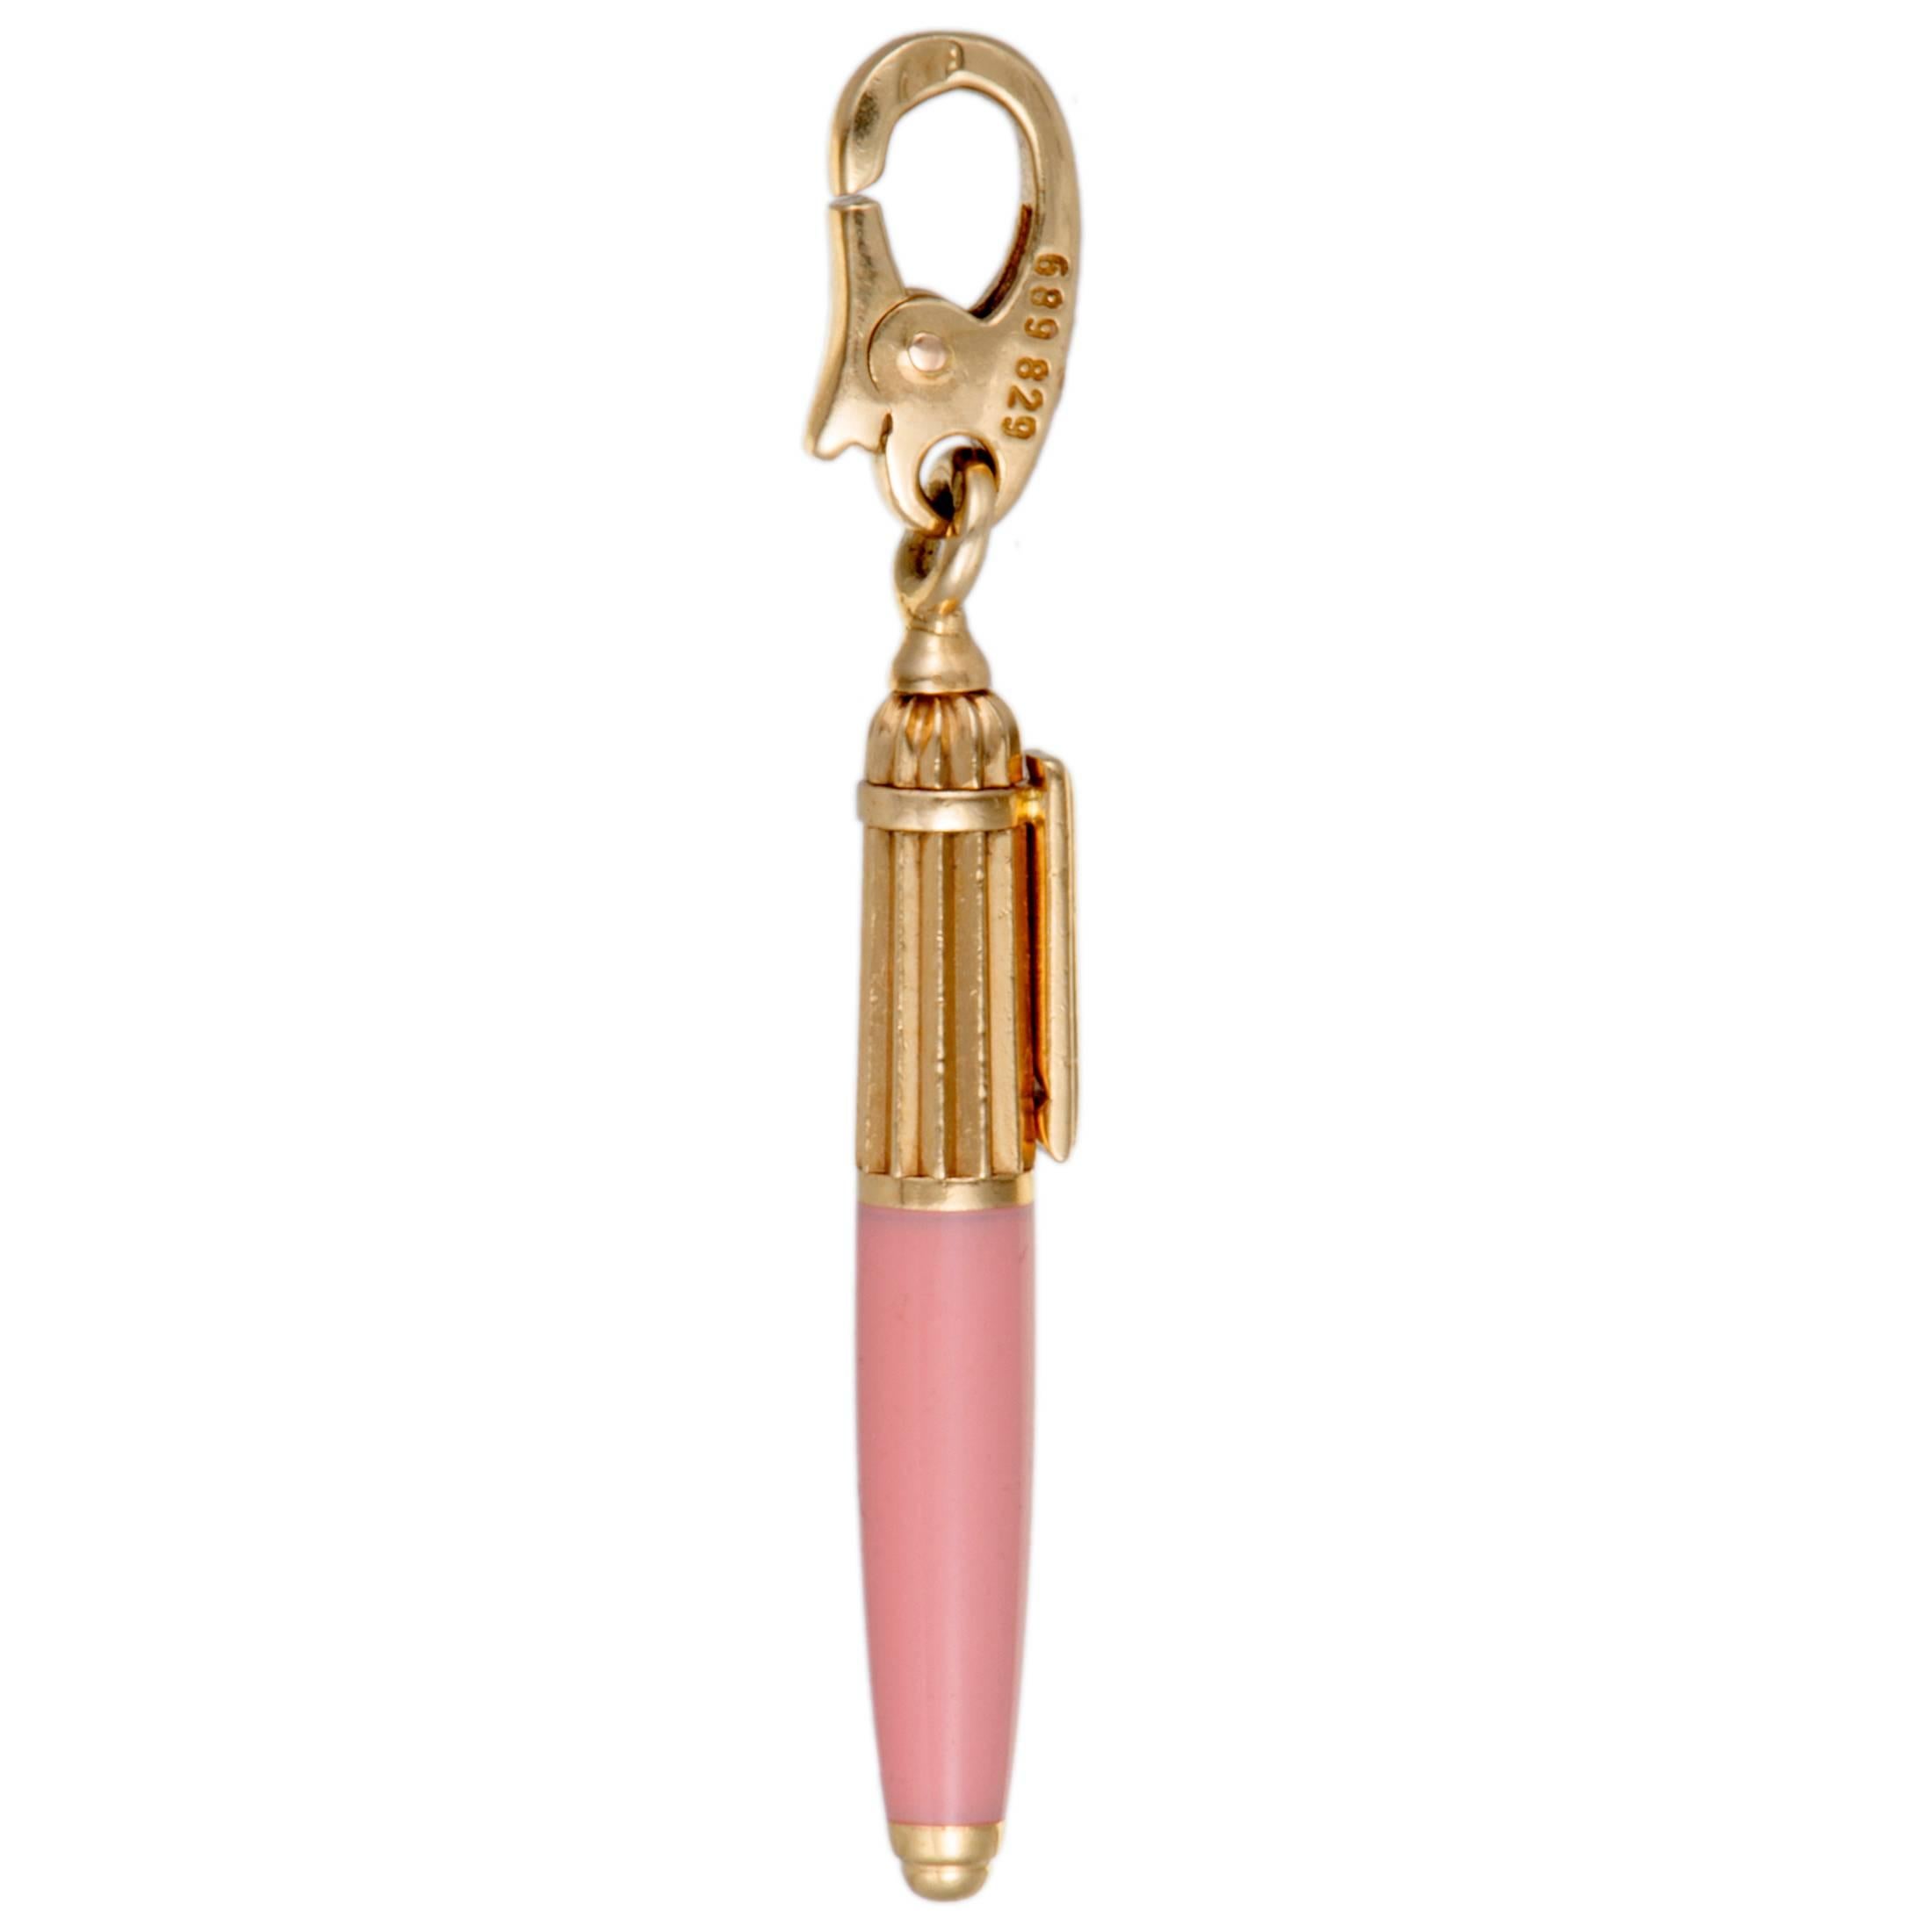 Presented by Cartier in luxurious 18K yellow gold, this exceptional charm offers an incredibly classy appearance. The alluring sheen of gold is beautifully accentuated by a sublime coral accent.
Included Items: Manufacturer's Box